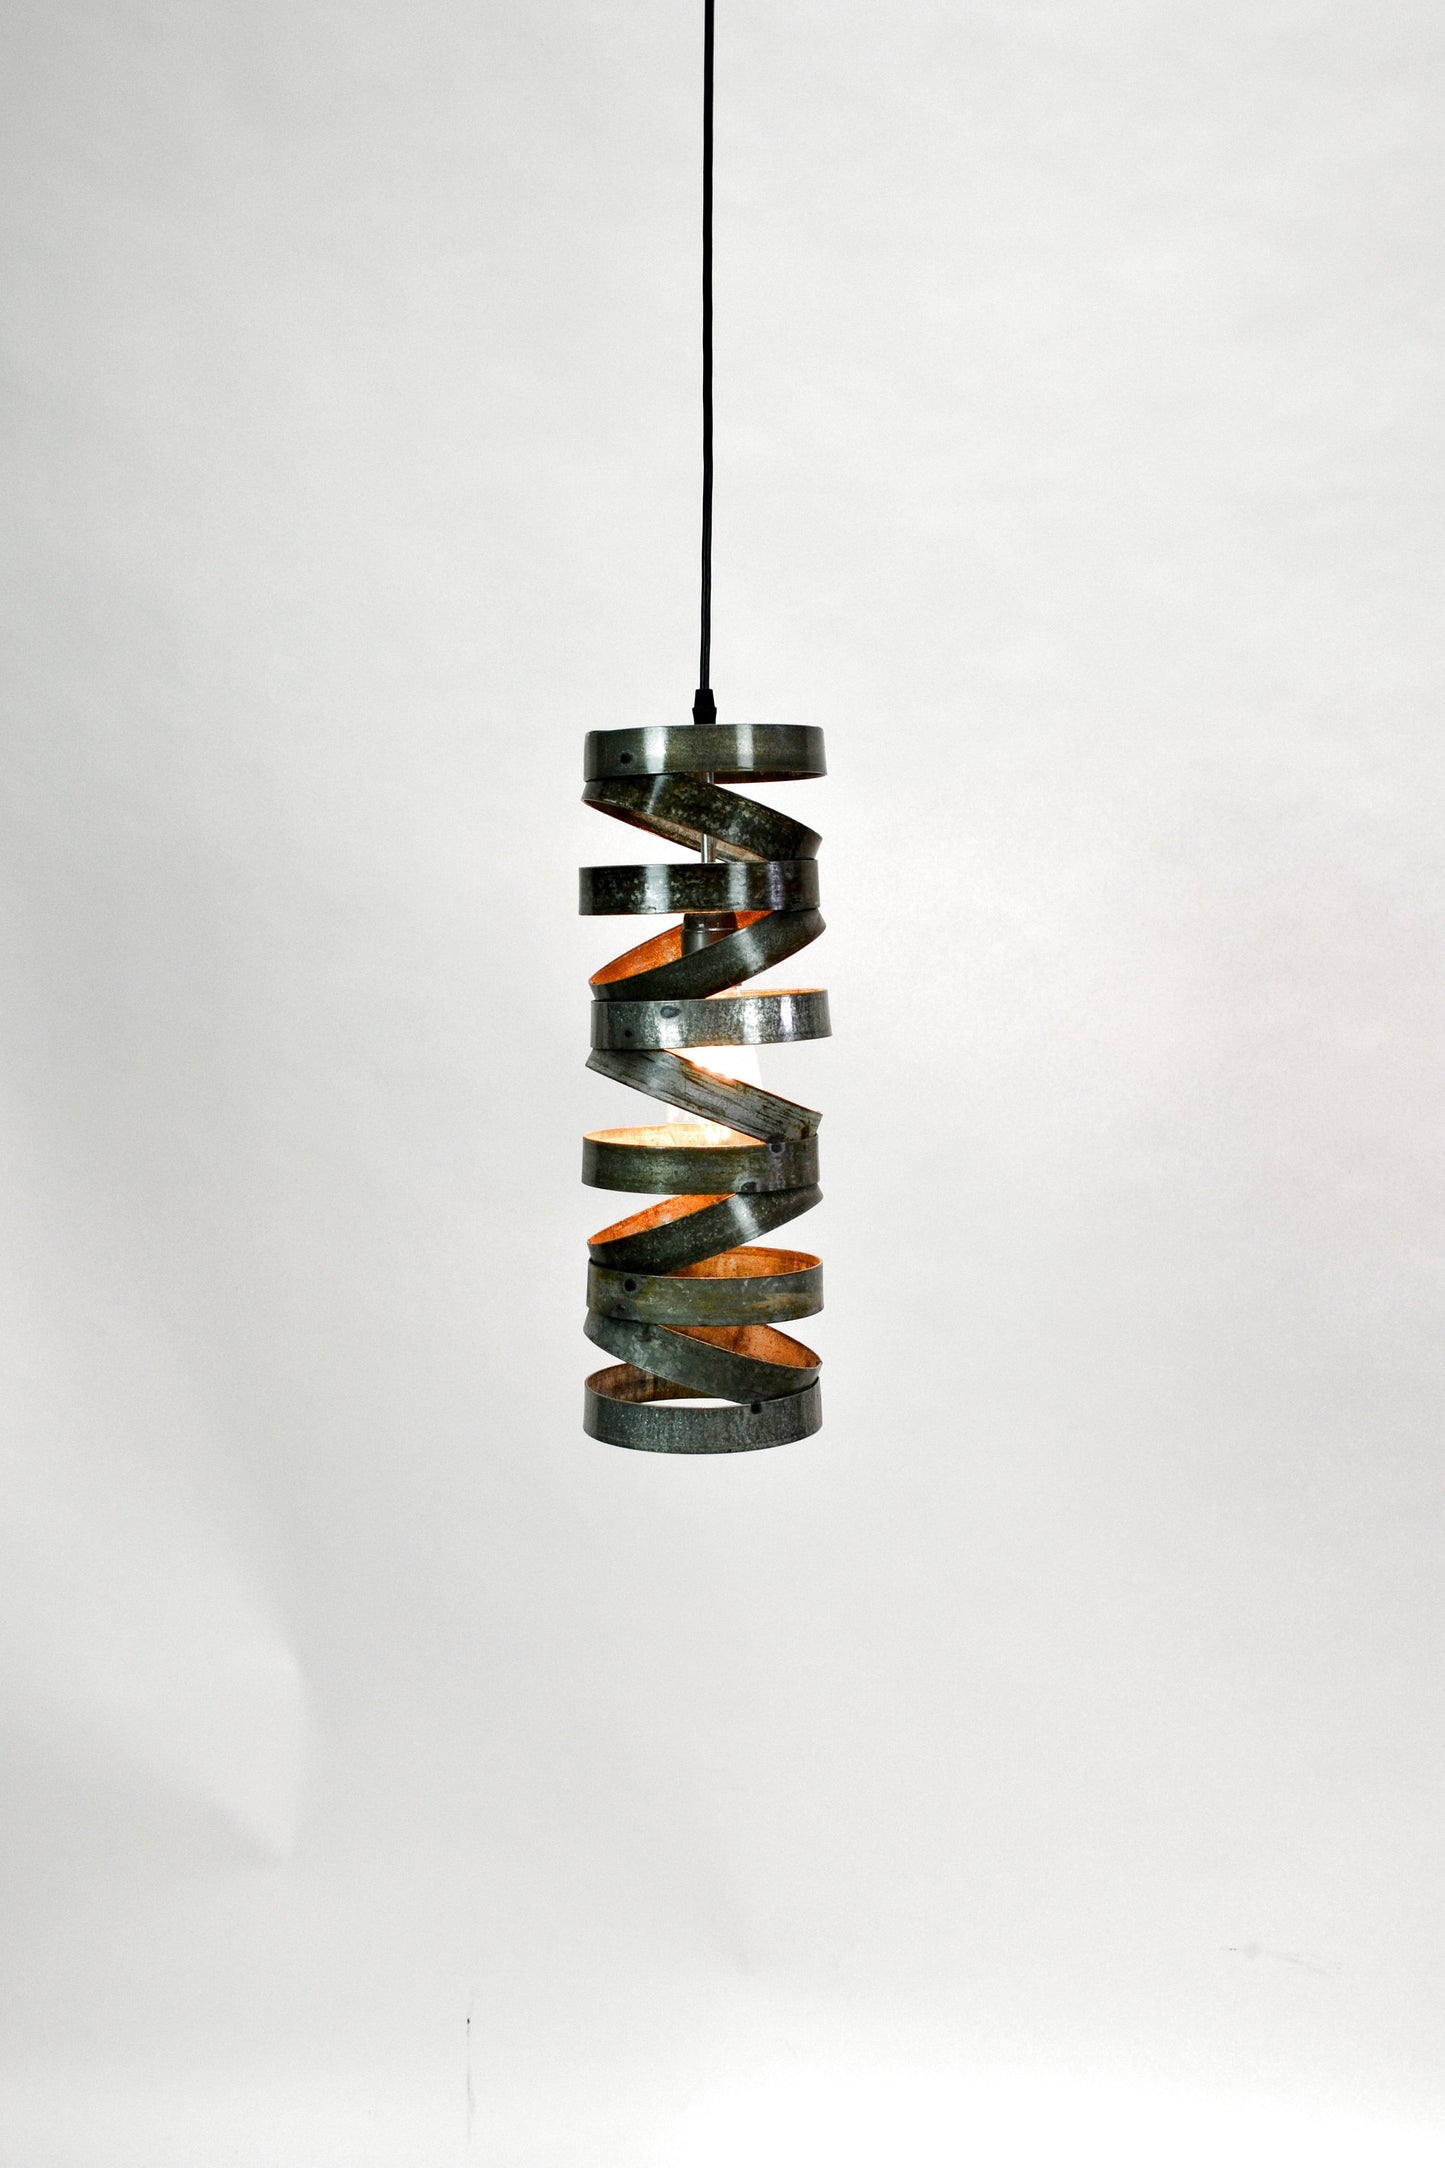 Wine Barrel Ring Pendant Light - VITALI Collection - "Menara" - made from salvaged Napa wine barrel rings - 100% Recycled!